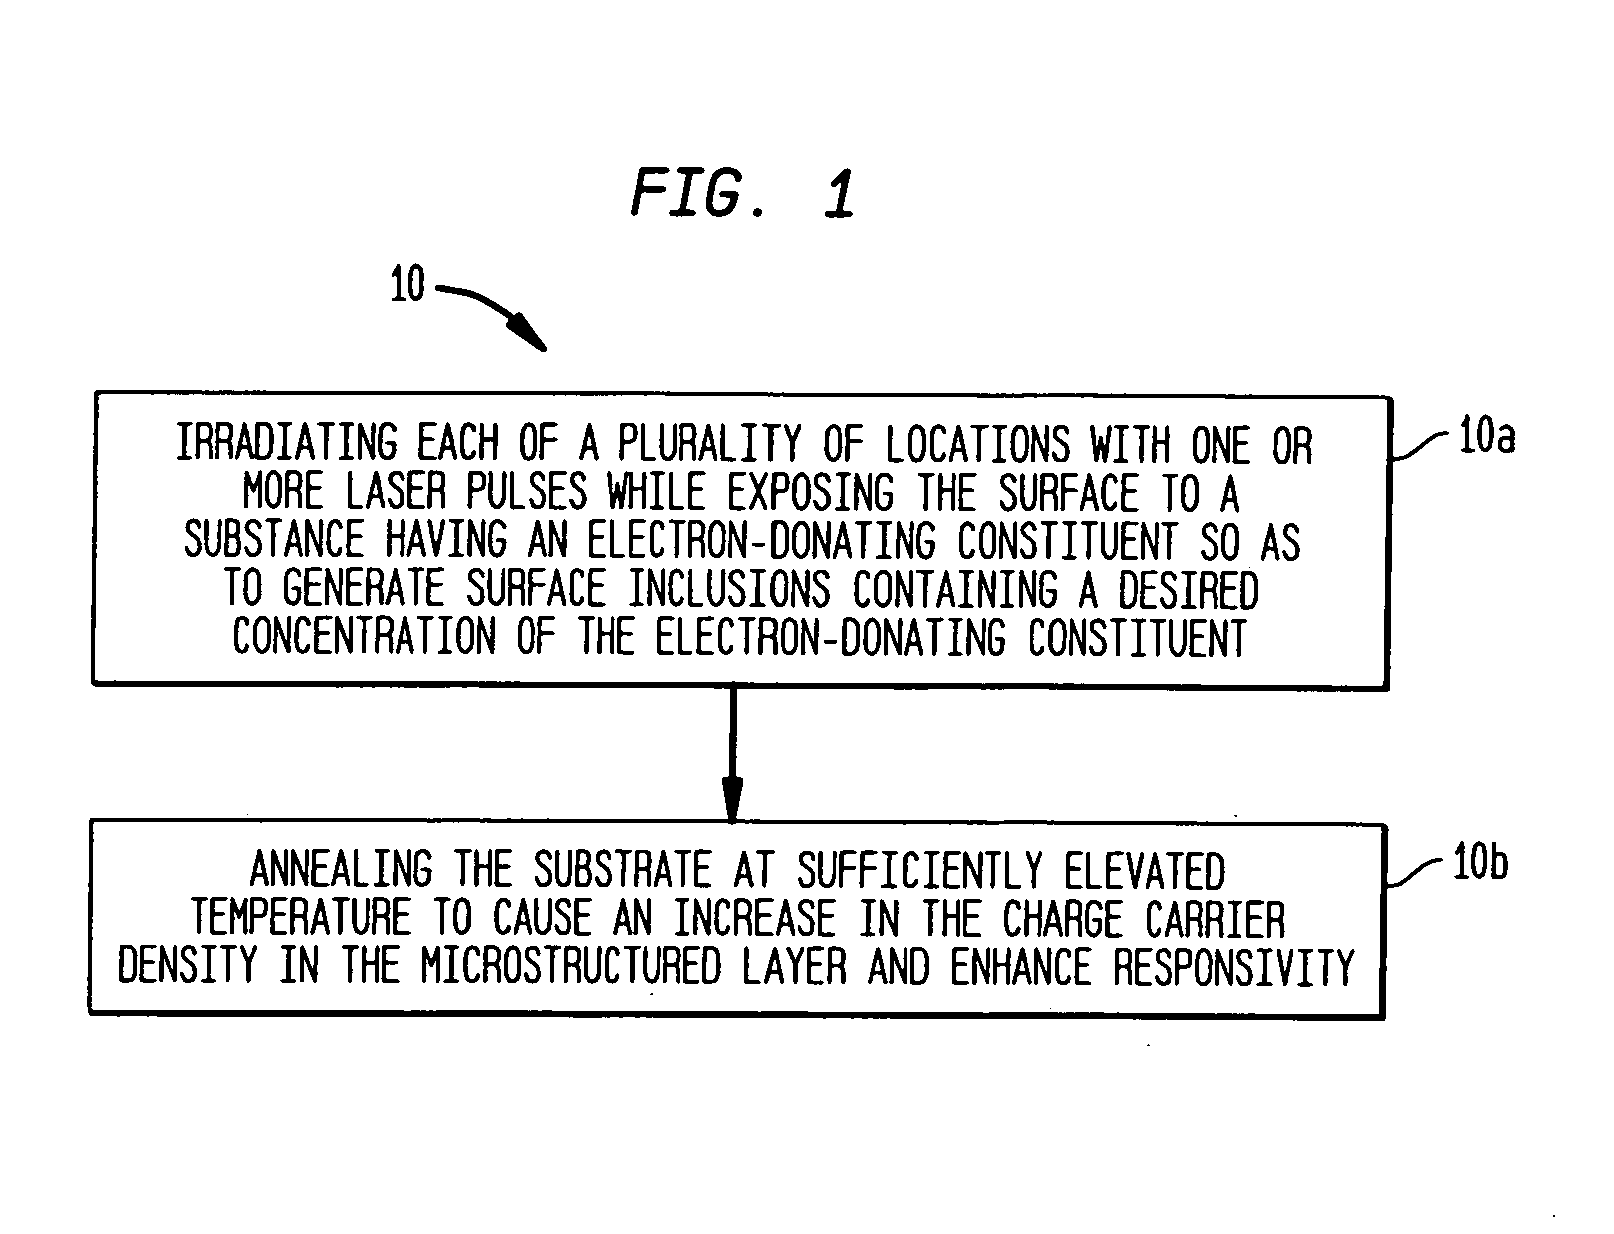 Manufacture of silicon-based devices having disordered sulfur-doped surface layers